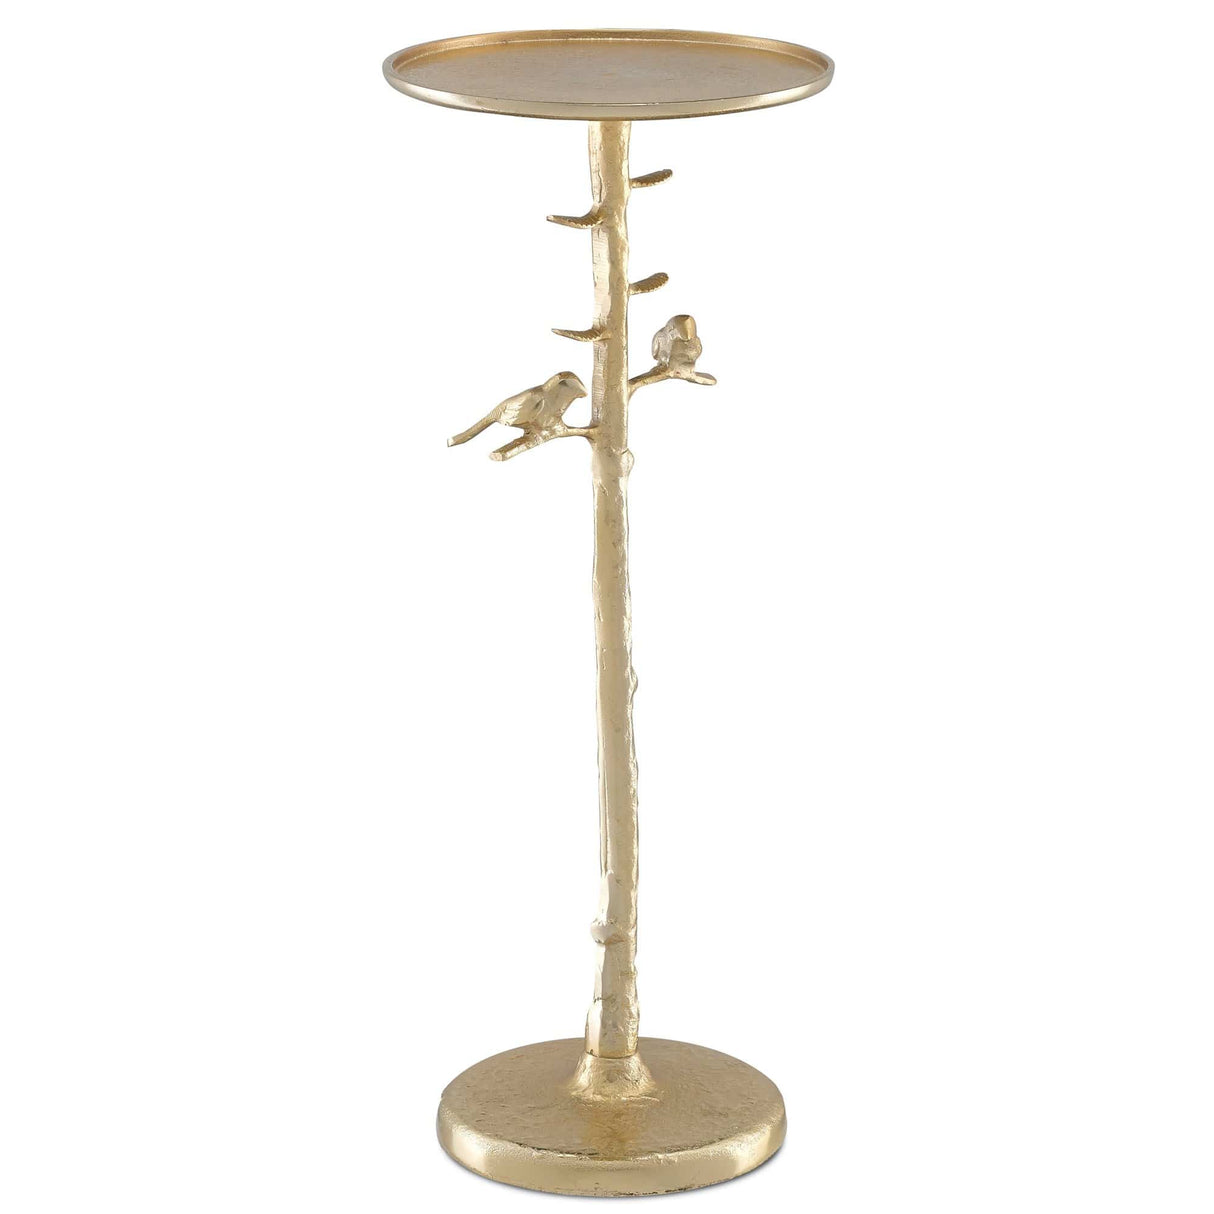 Currey and Company Piaf Drinks Table - Gold Furniture currey-co-4000-0063